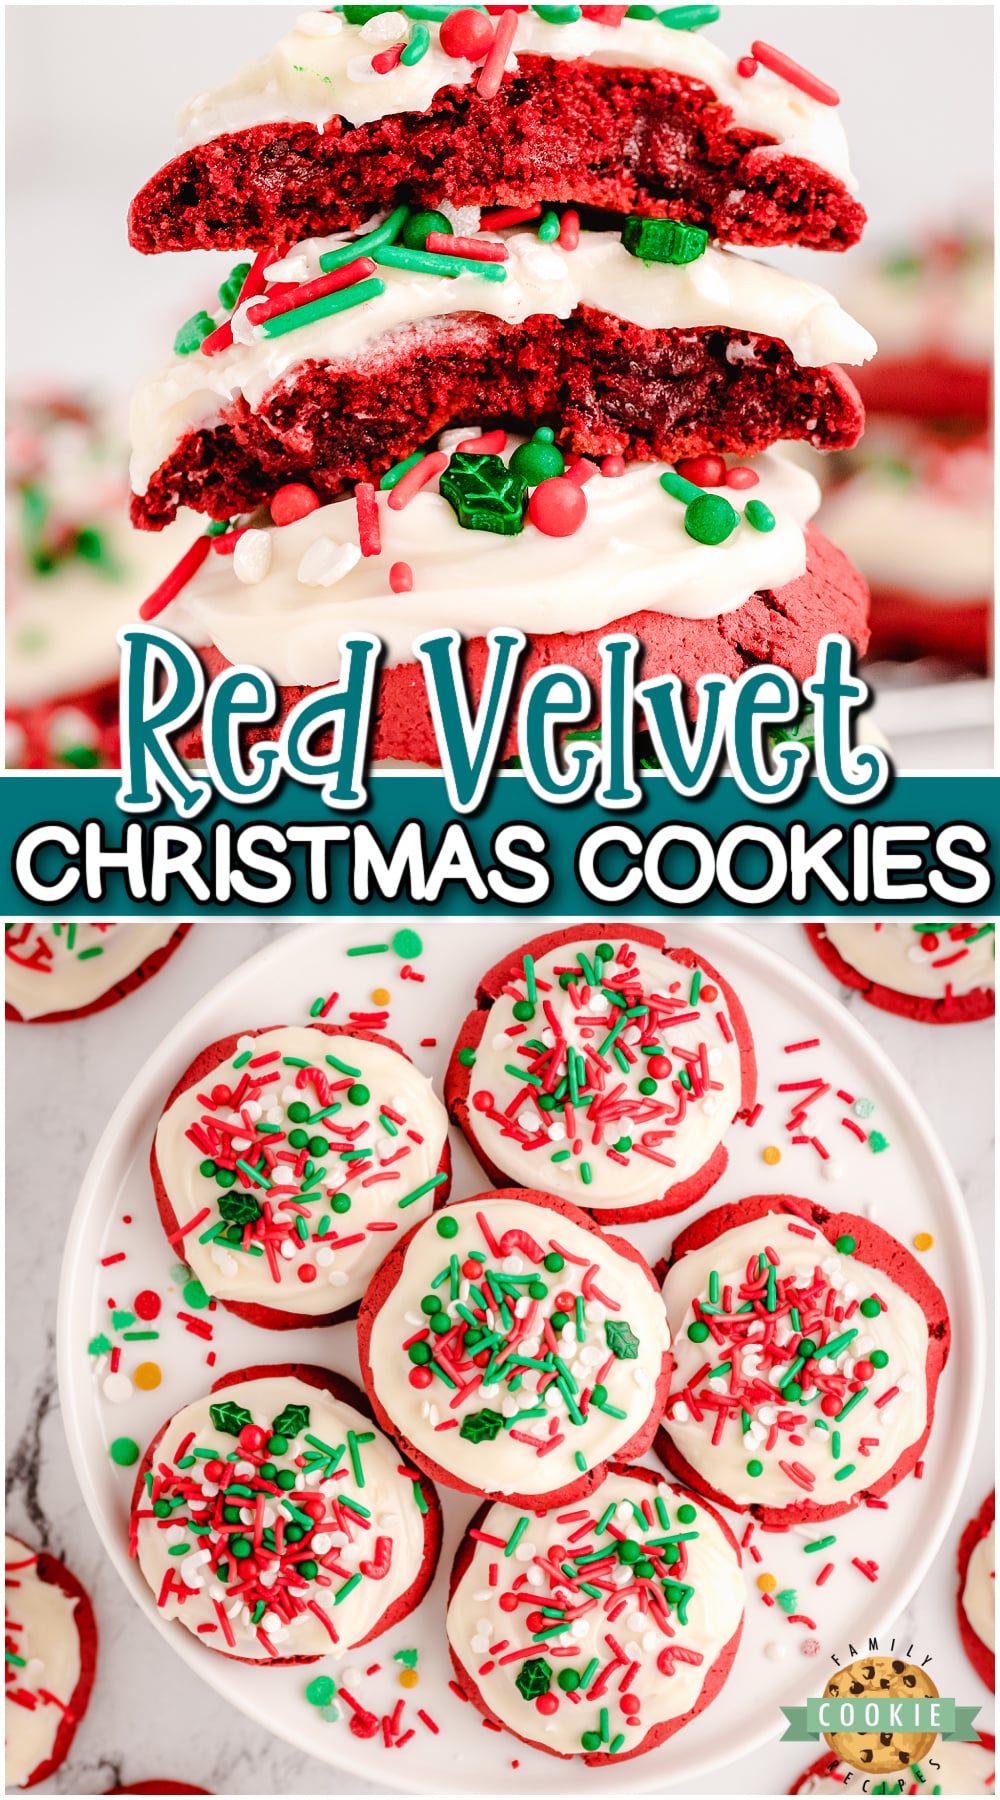 Red Velvet Christmas cookies with the festive red color, rich chocolate taste & cream cheese icing on top, these cookies are sure to be holiday favorites! via @buttergirls